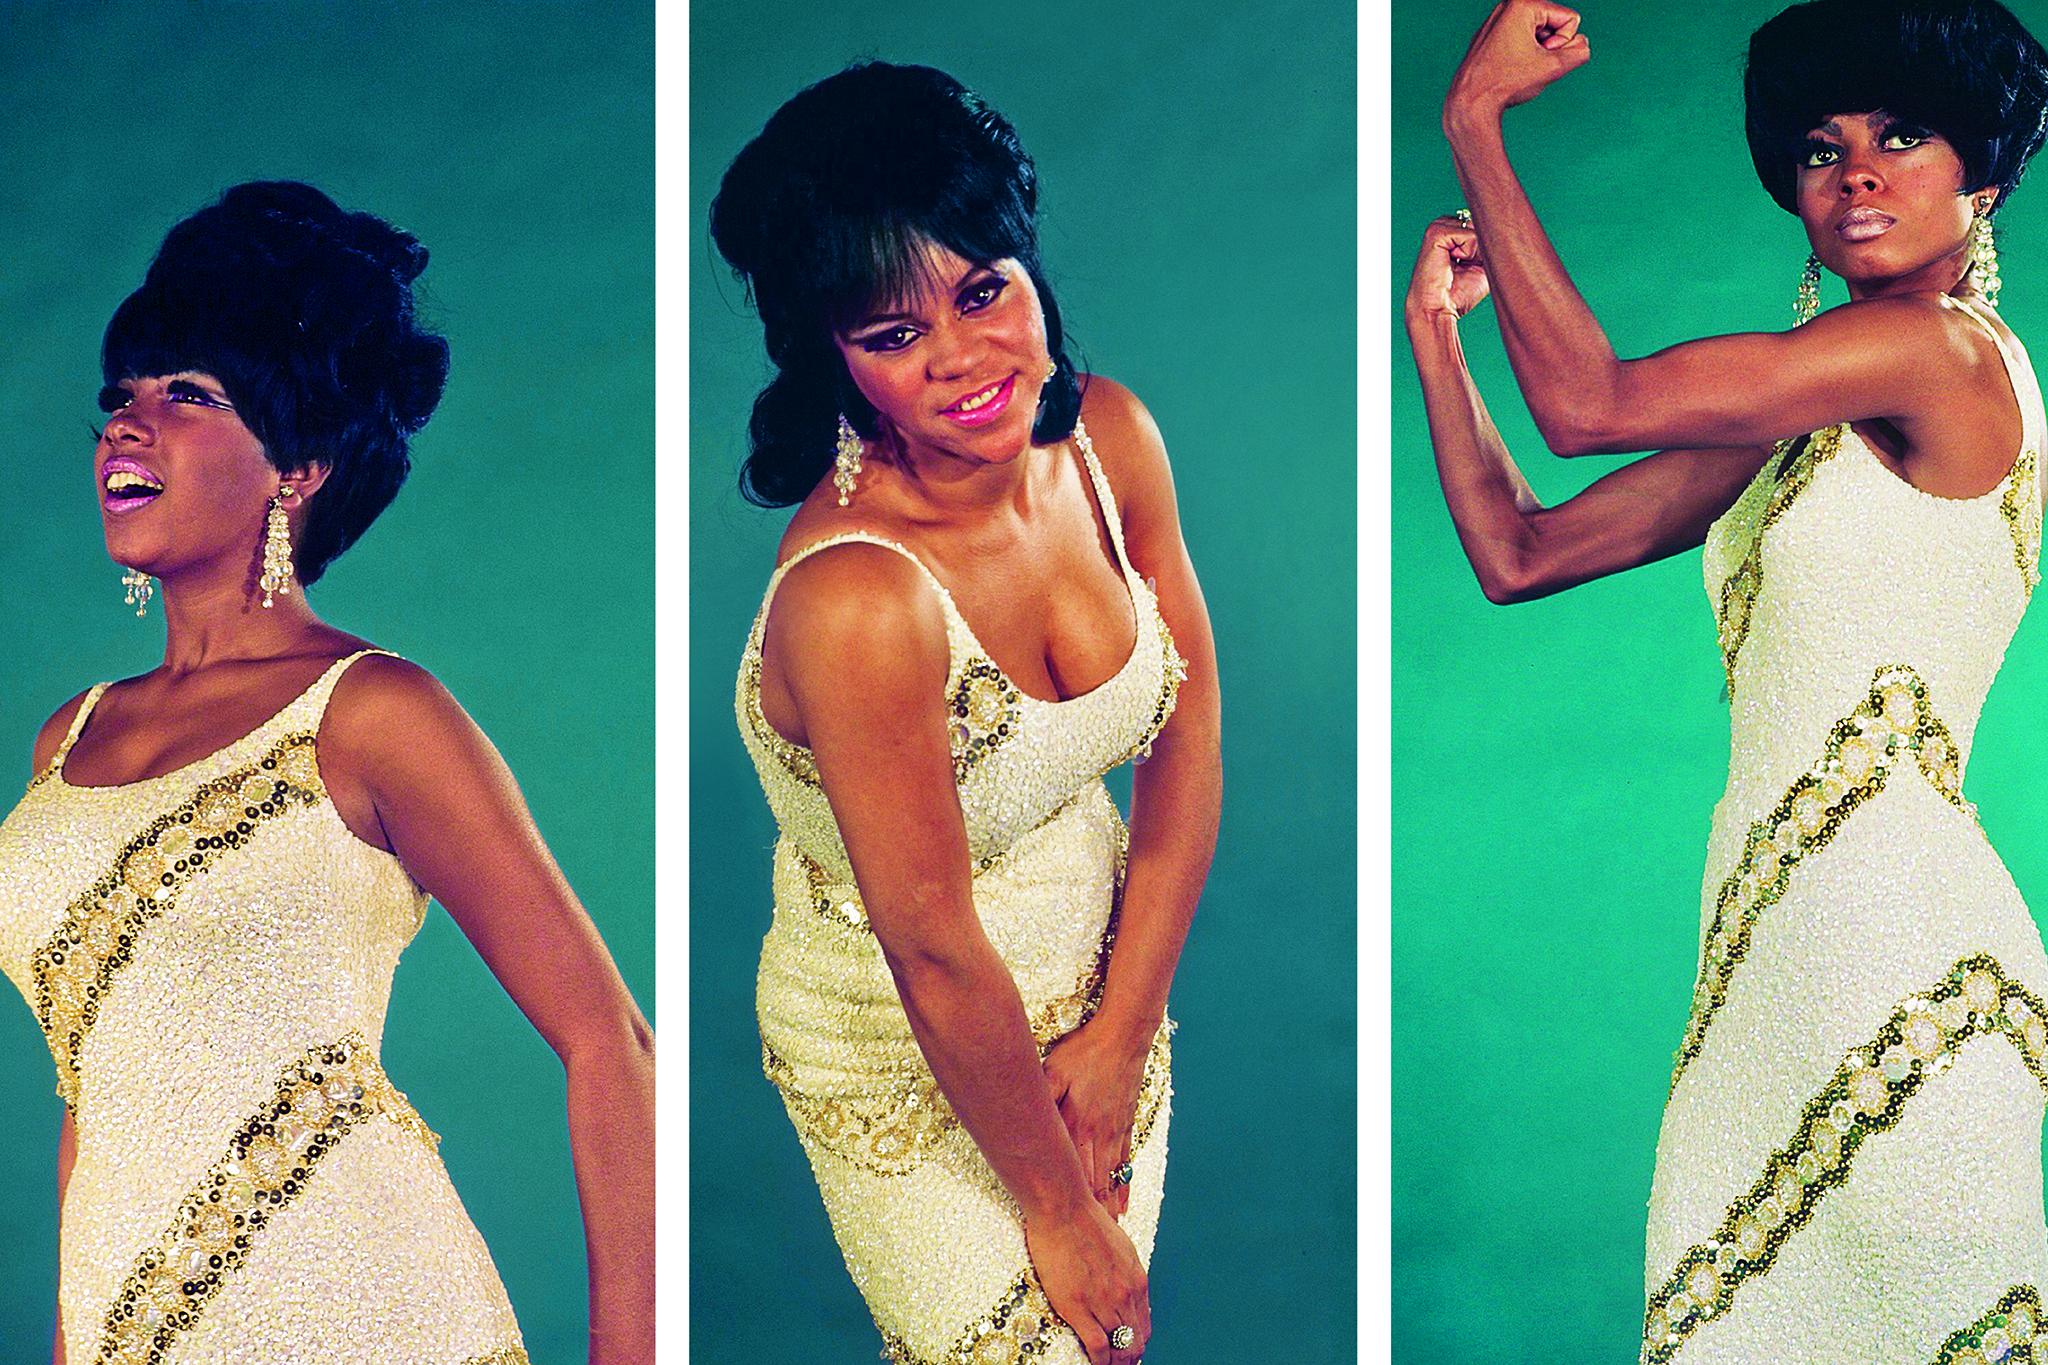 From one of the last photoshoots before original member Florence Ballard (right) left the group in 1967